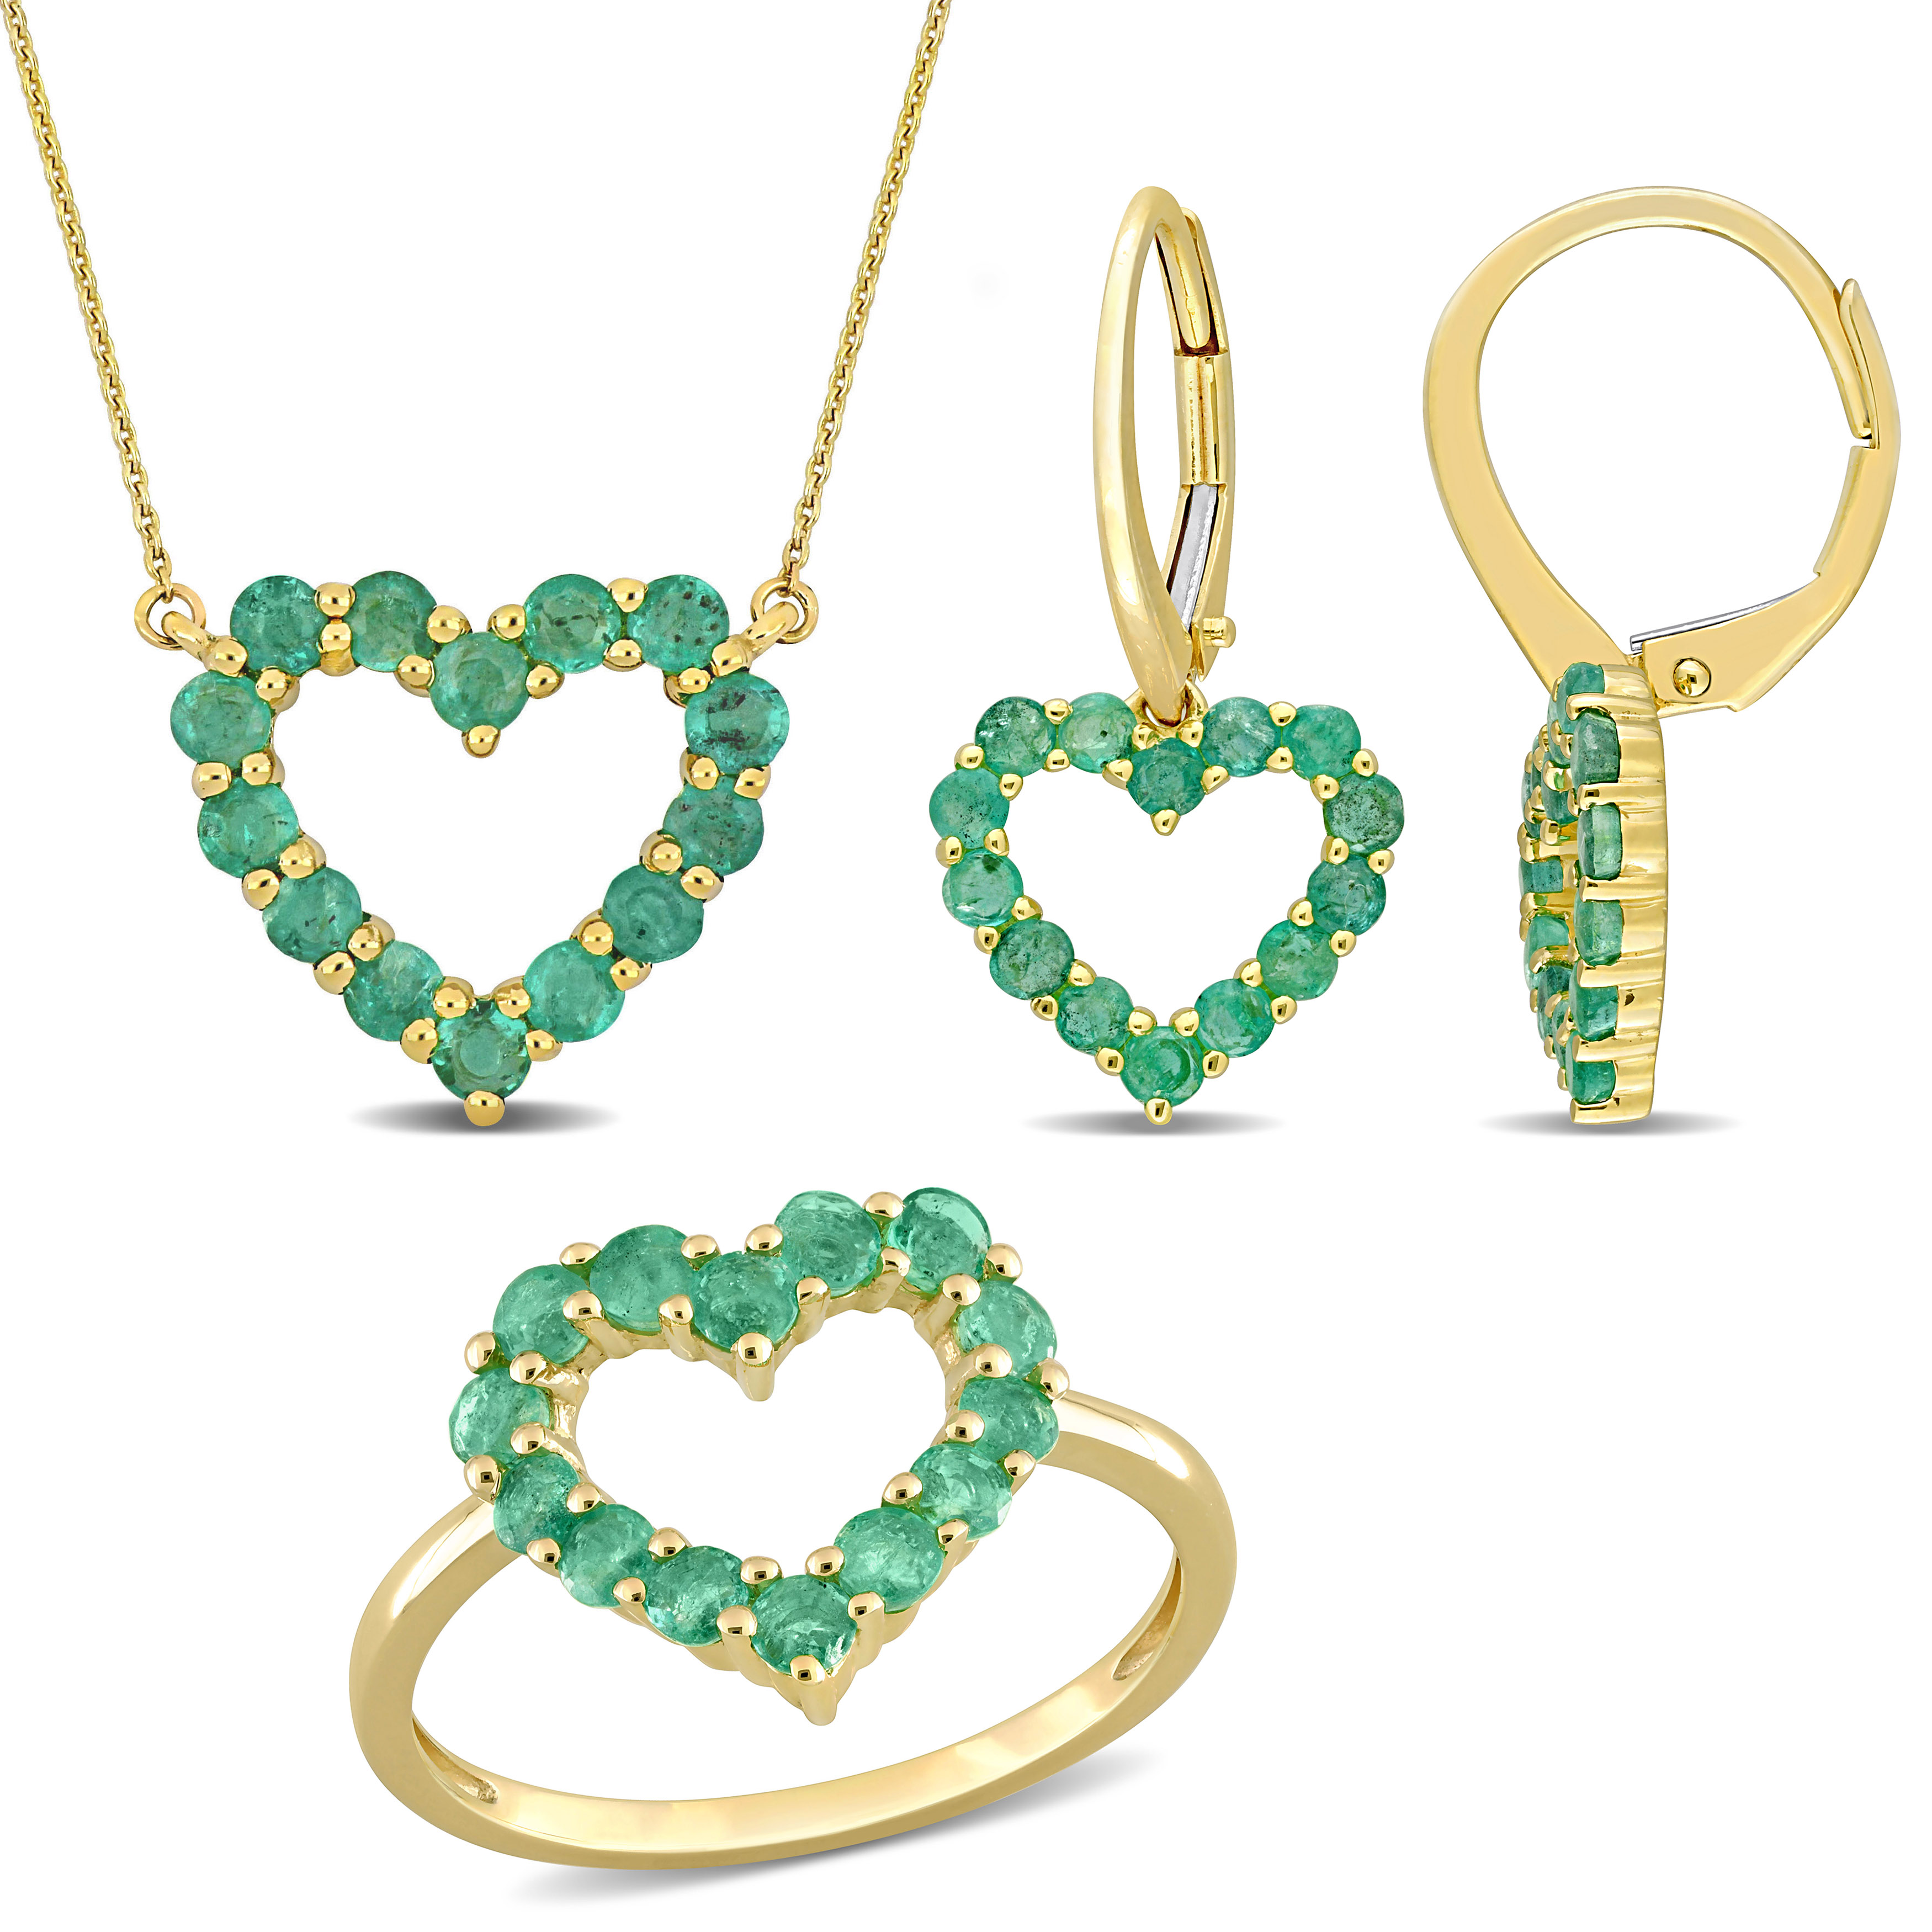 2 1/4 CT TGW Emerald 3-Piece Jewelry Set - Heart Pendant with Chain, Earrings and Ring in 10k Yellow Gold